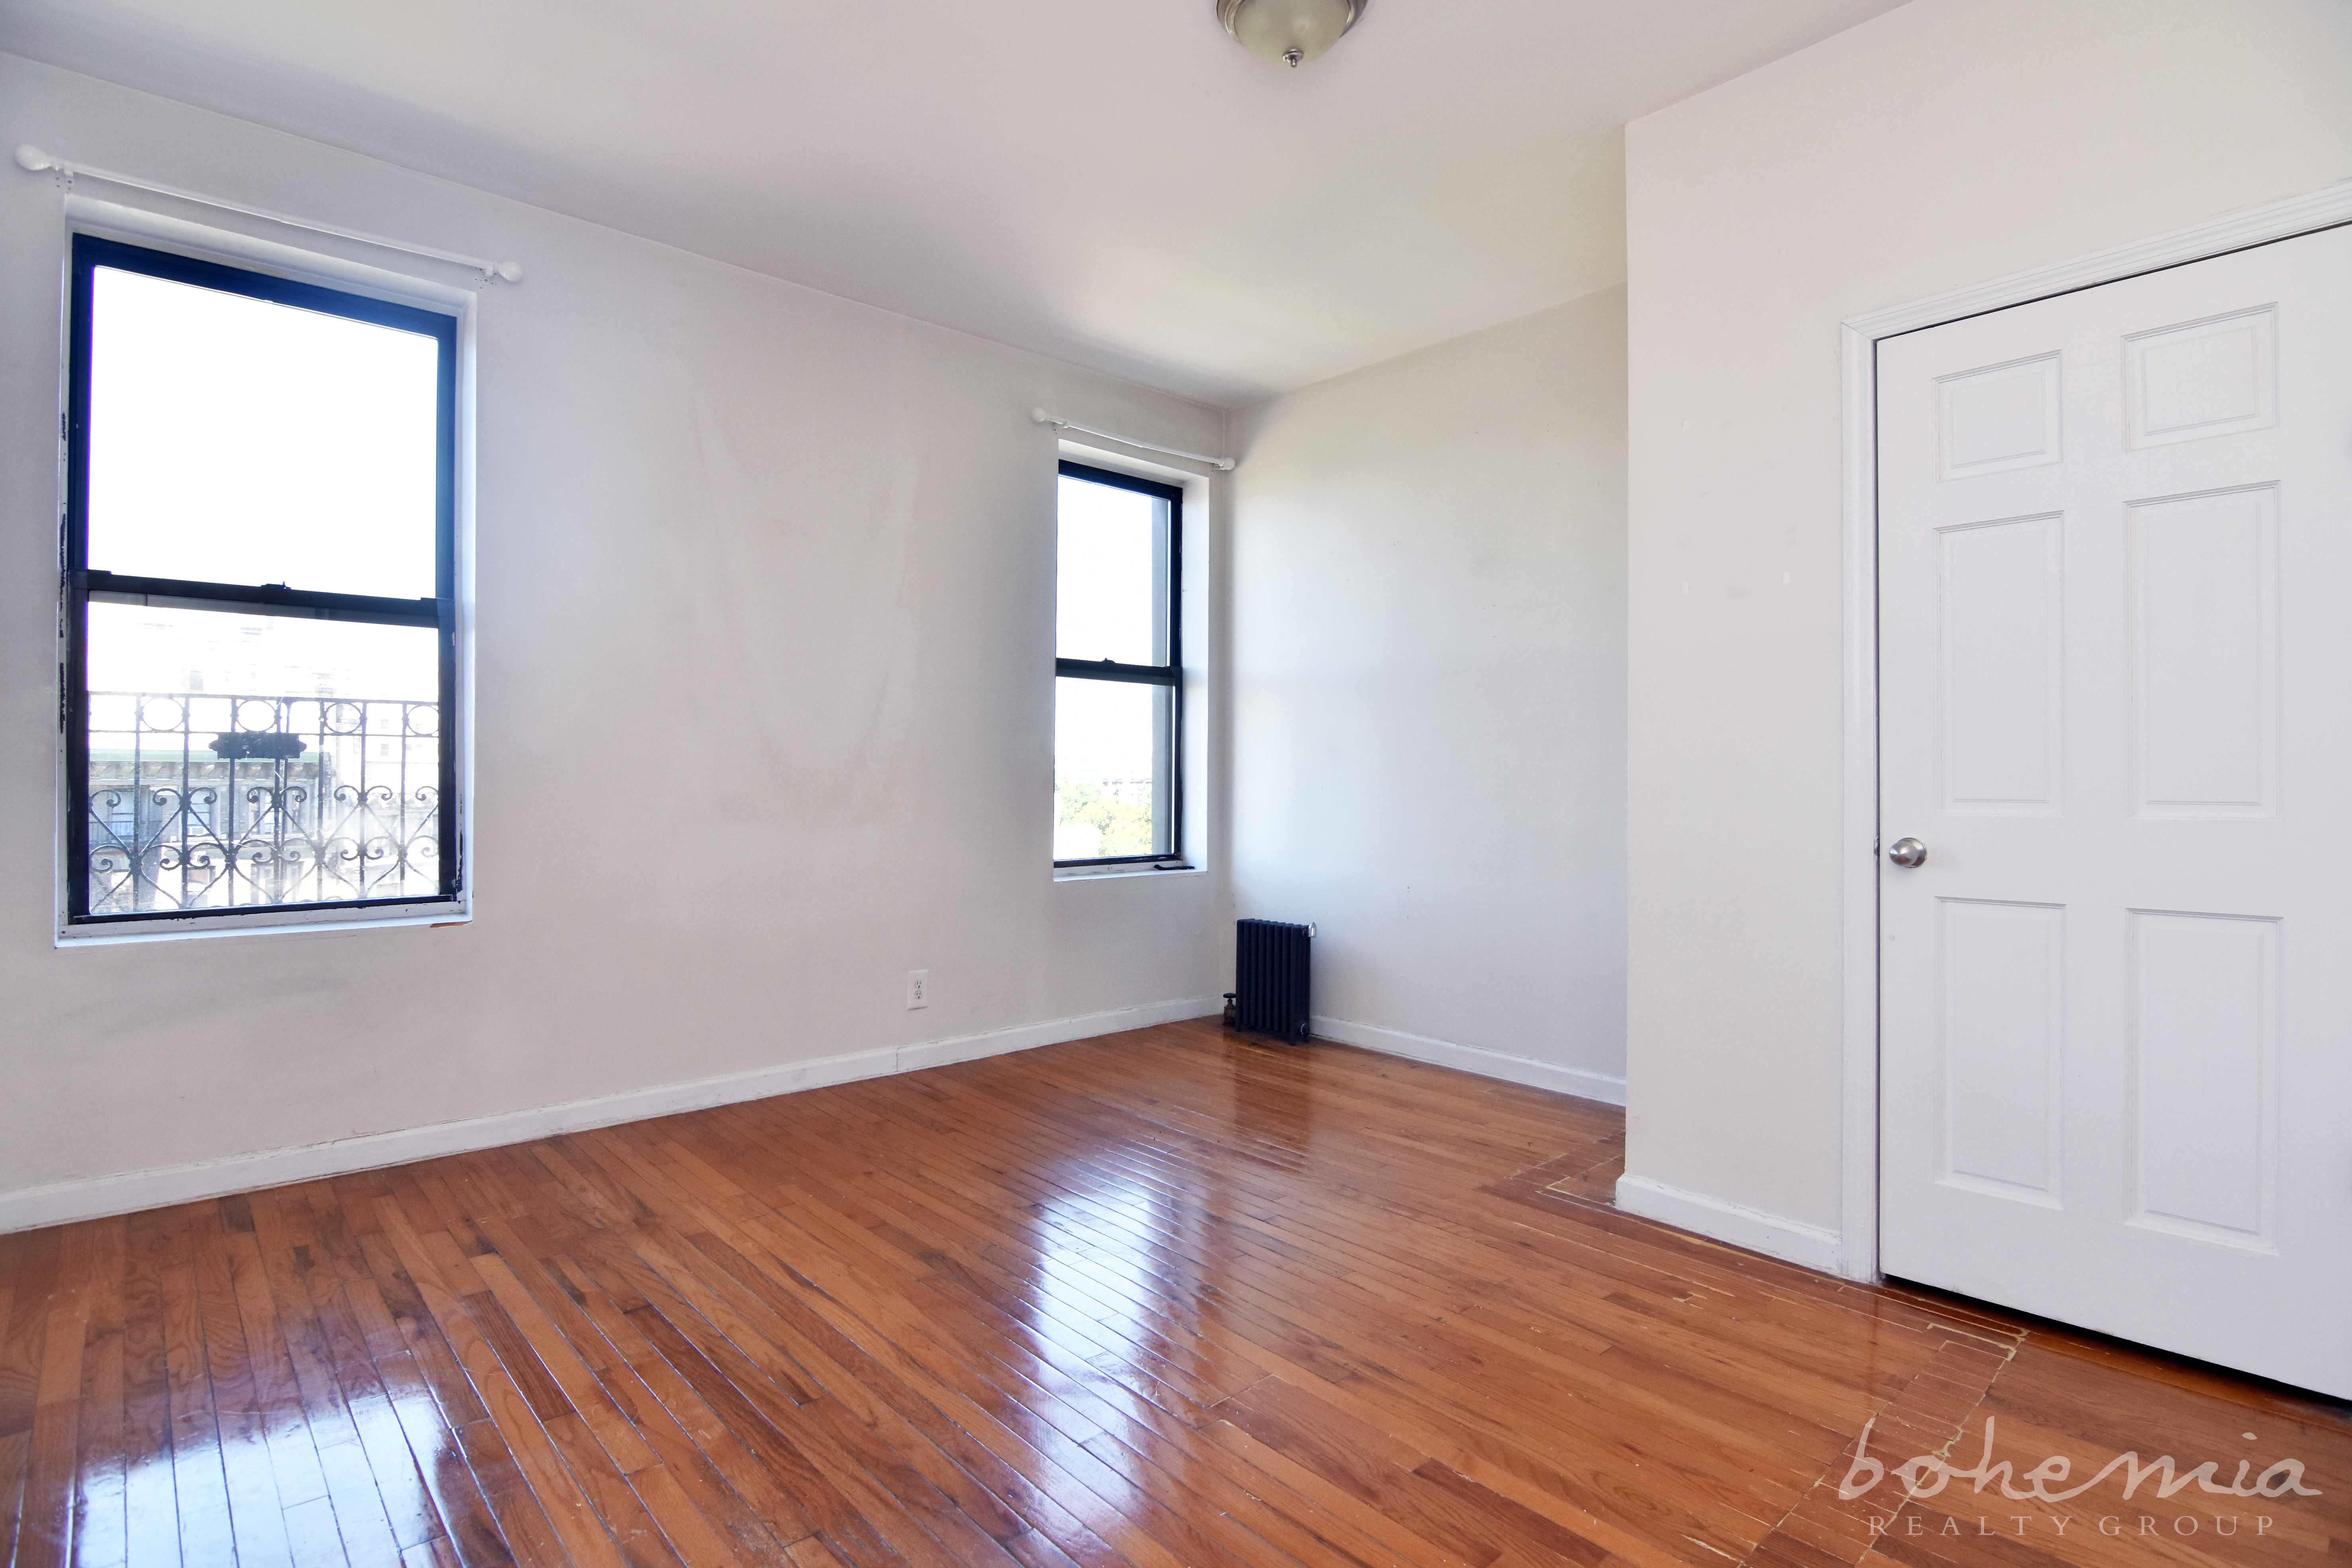 559 West 156th Street, New York City NY 10032 A.N Shell Realty